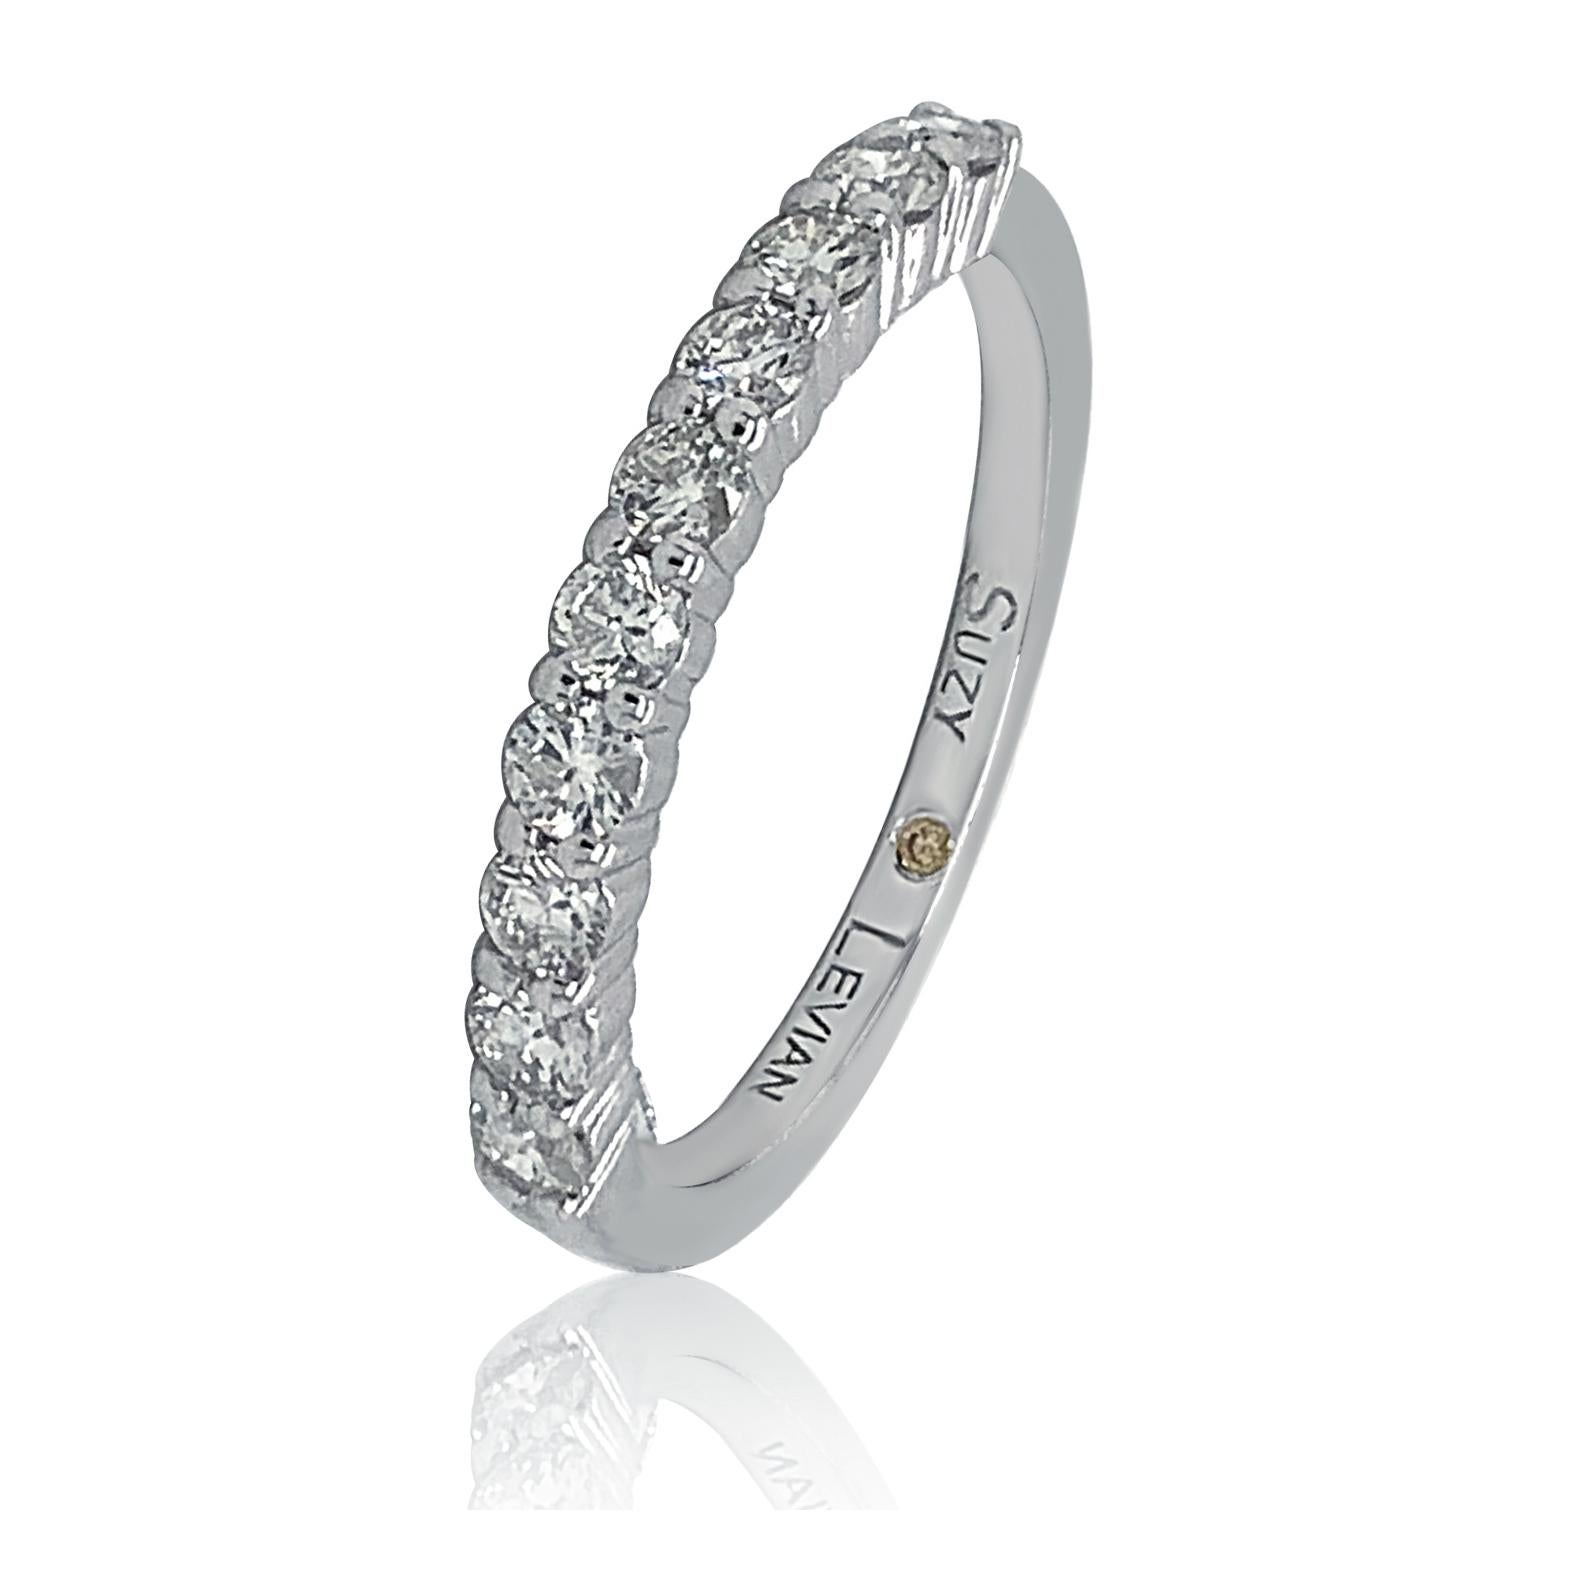 This elegant Suzy Levian diamond half eternity band features a total of ten round cut diamonds (G-H, S1-S2). The diamonds sparkle along half the eternity band, for a sparkle you can't miss with a comfort fit. Designed by Suzy Levian. This 14K white